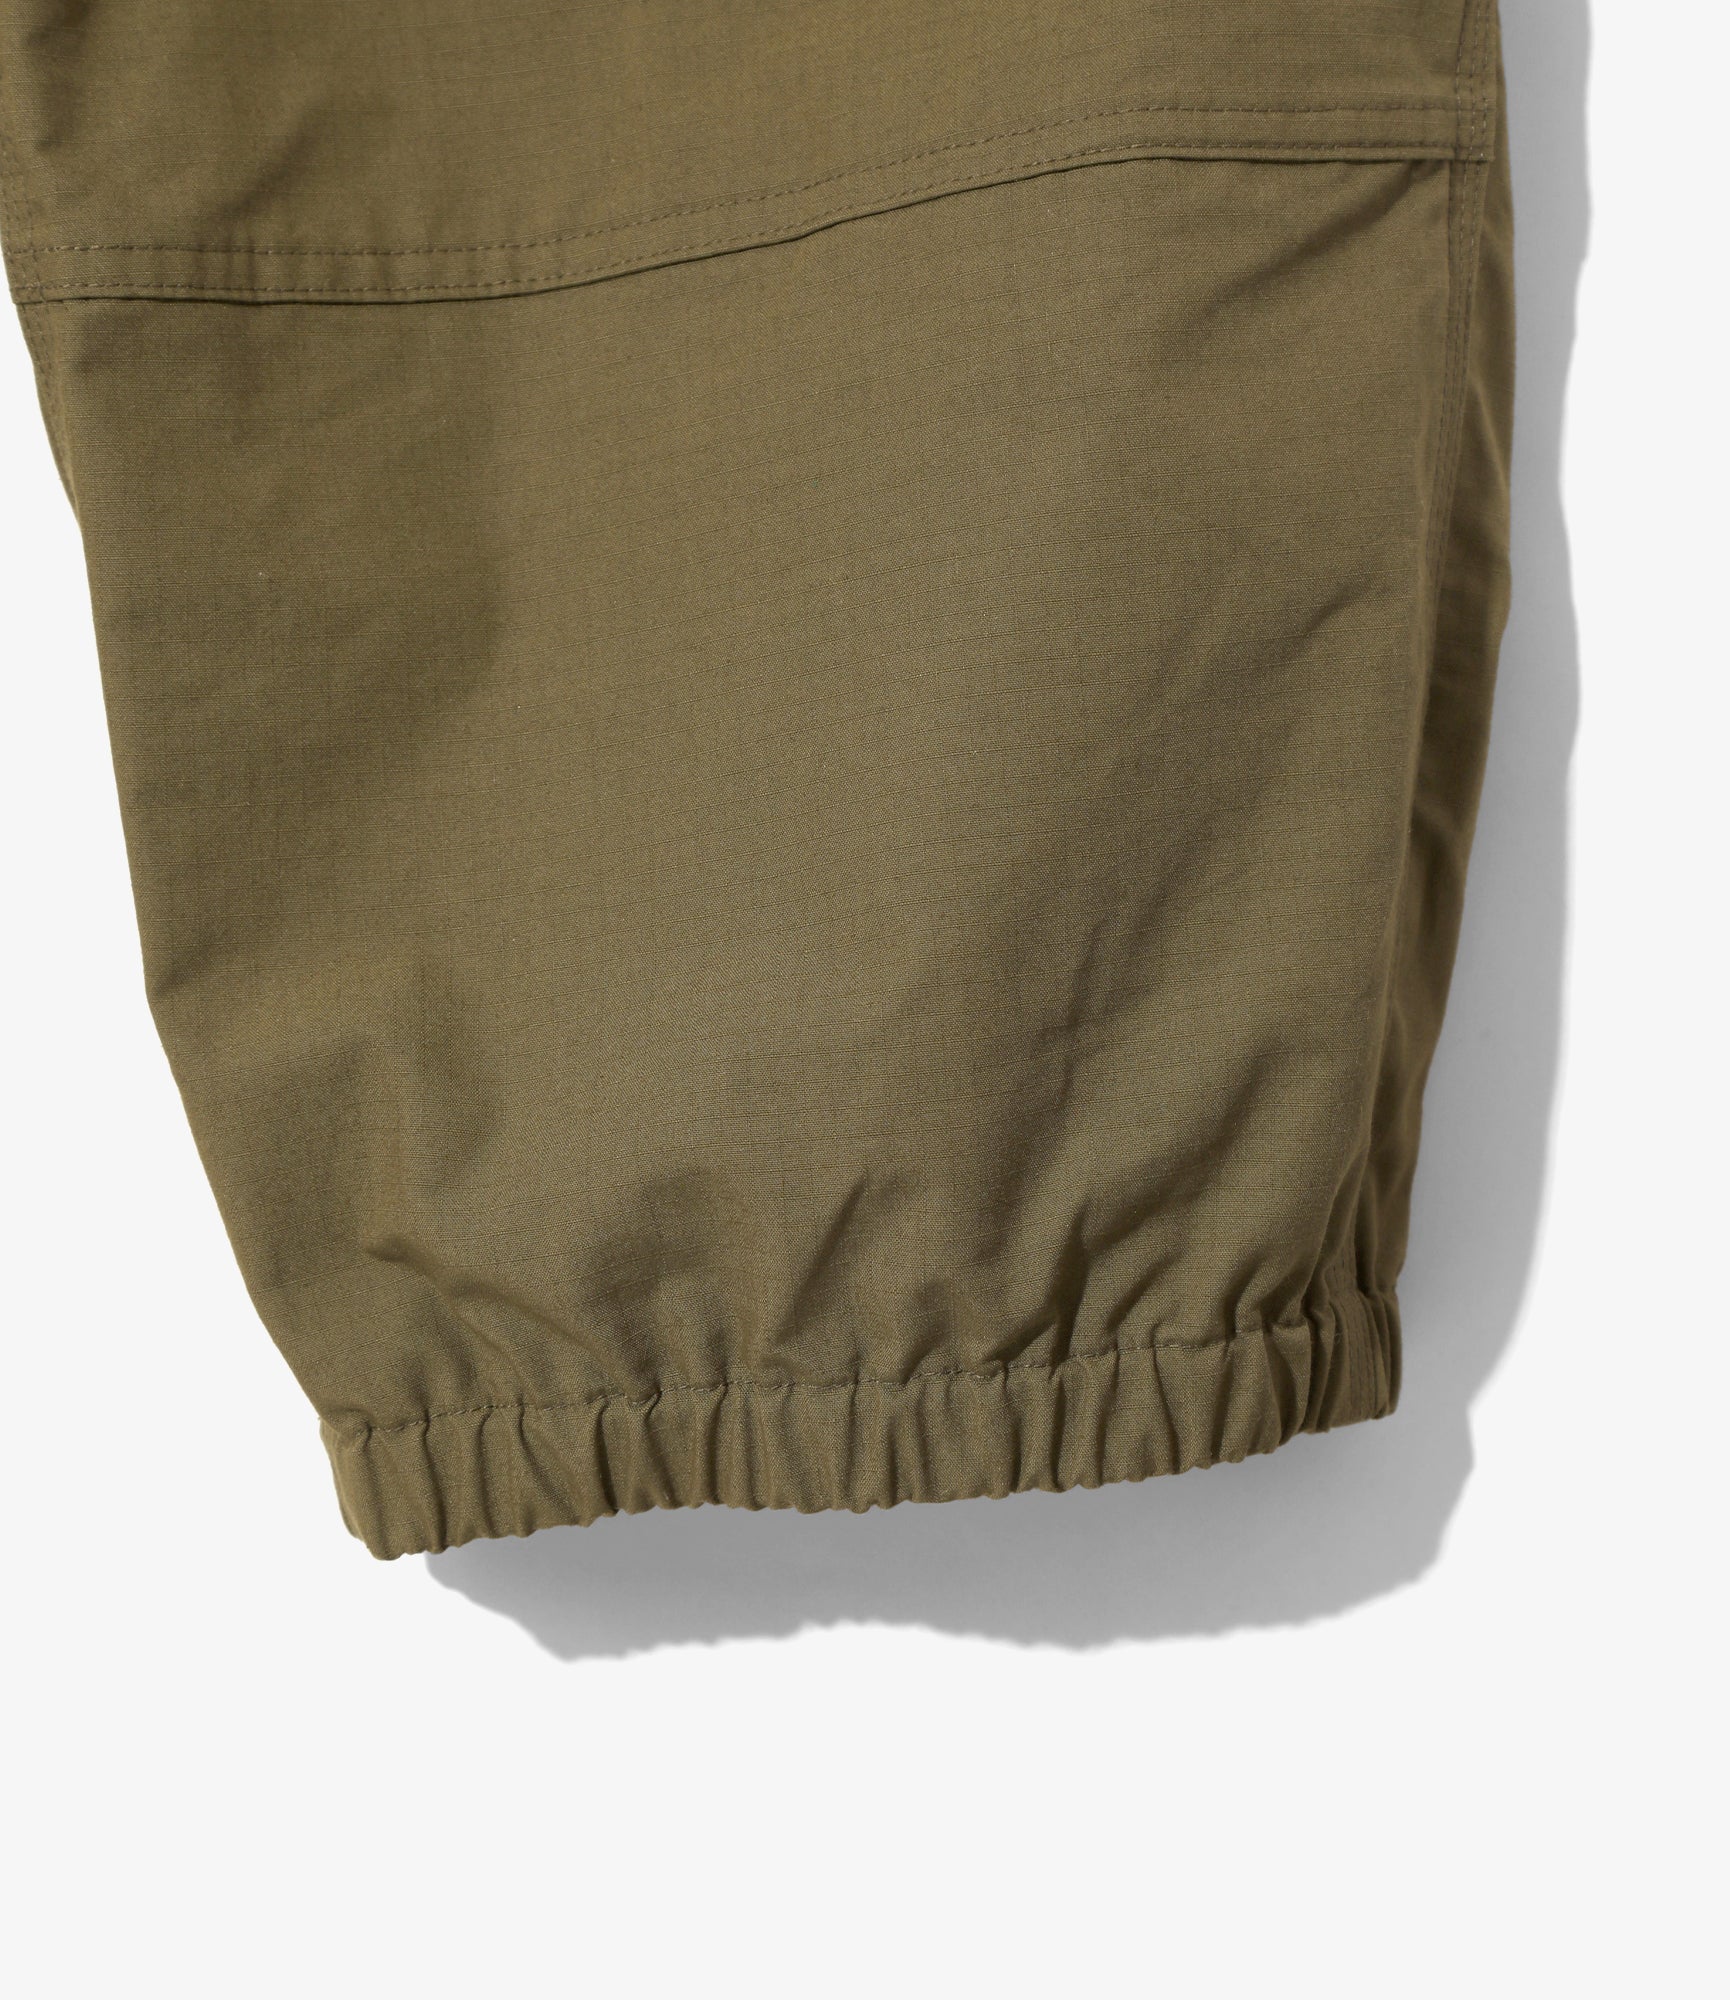 Belted O.P.P. Pant - Olive - C/MO Ripstop